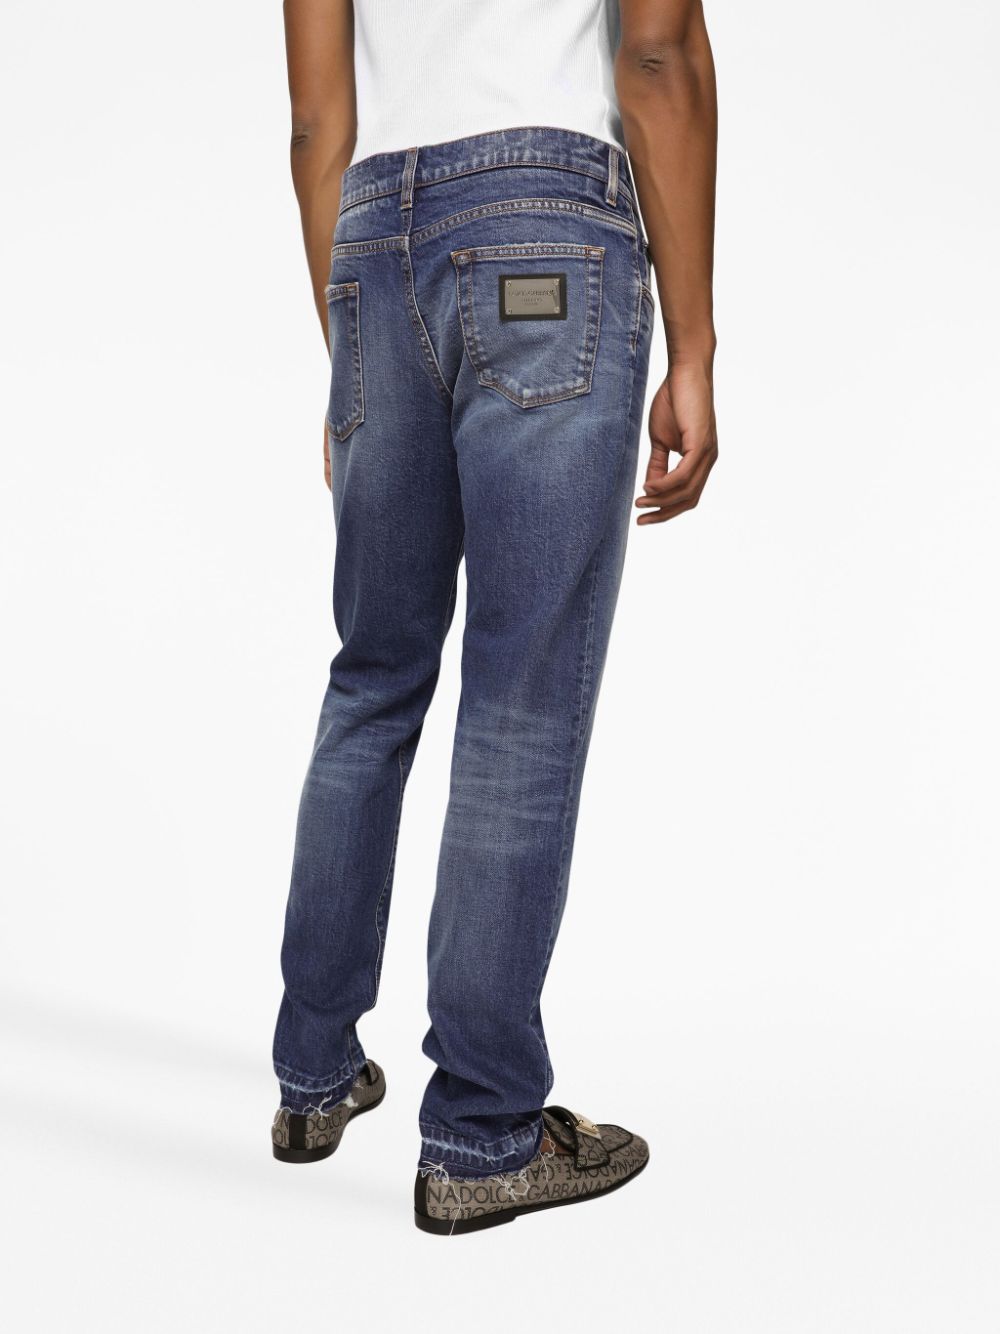 blue jeans with silver logo patch